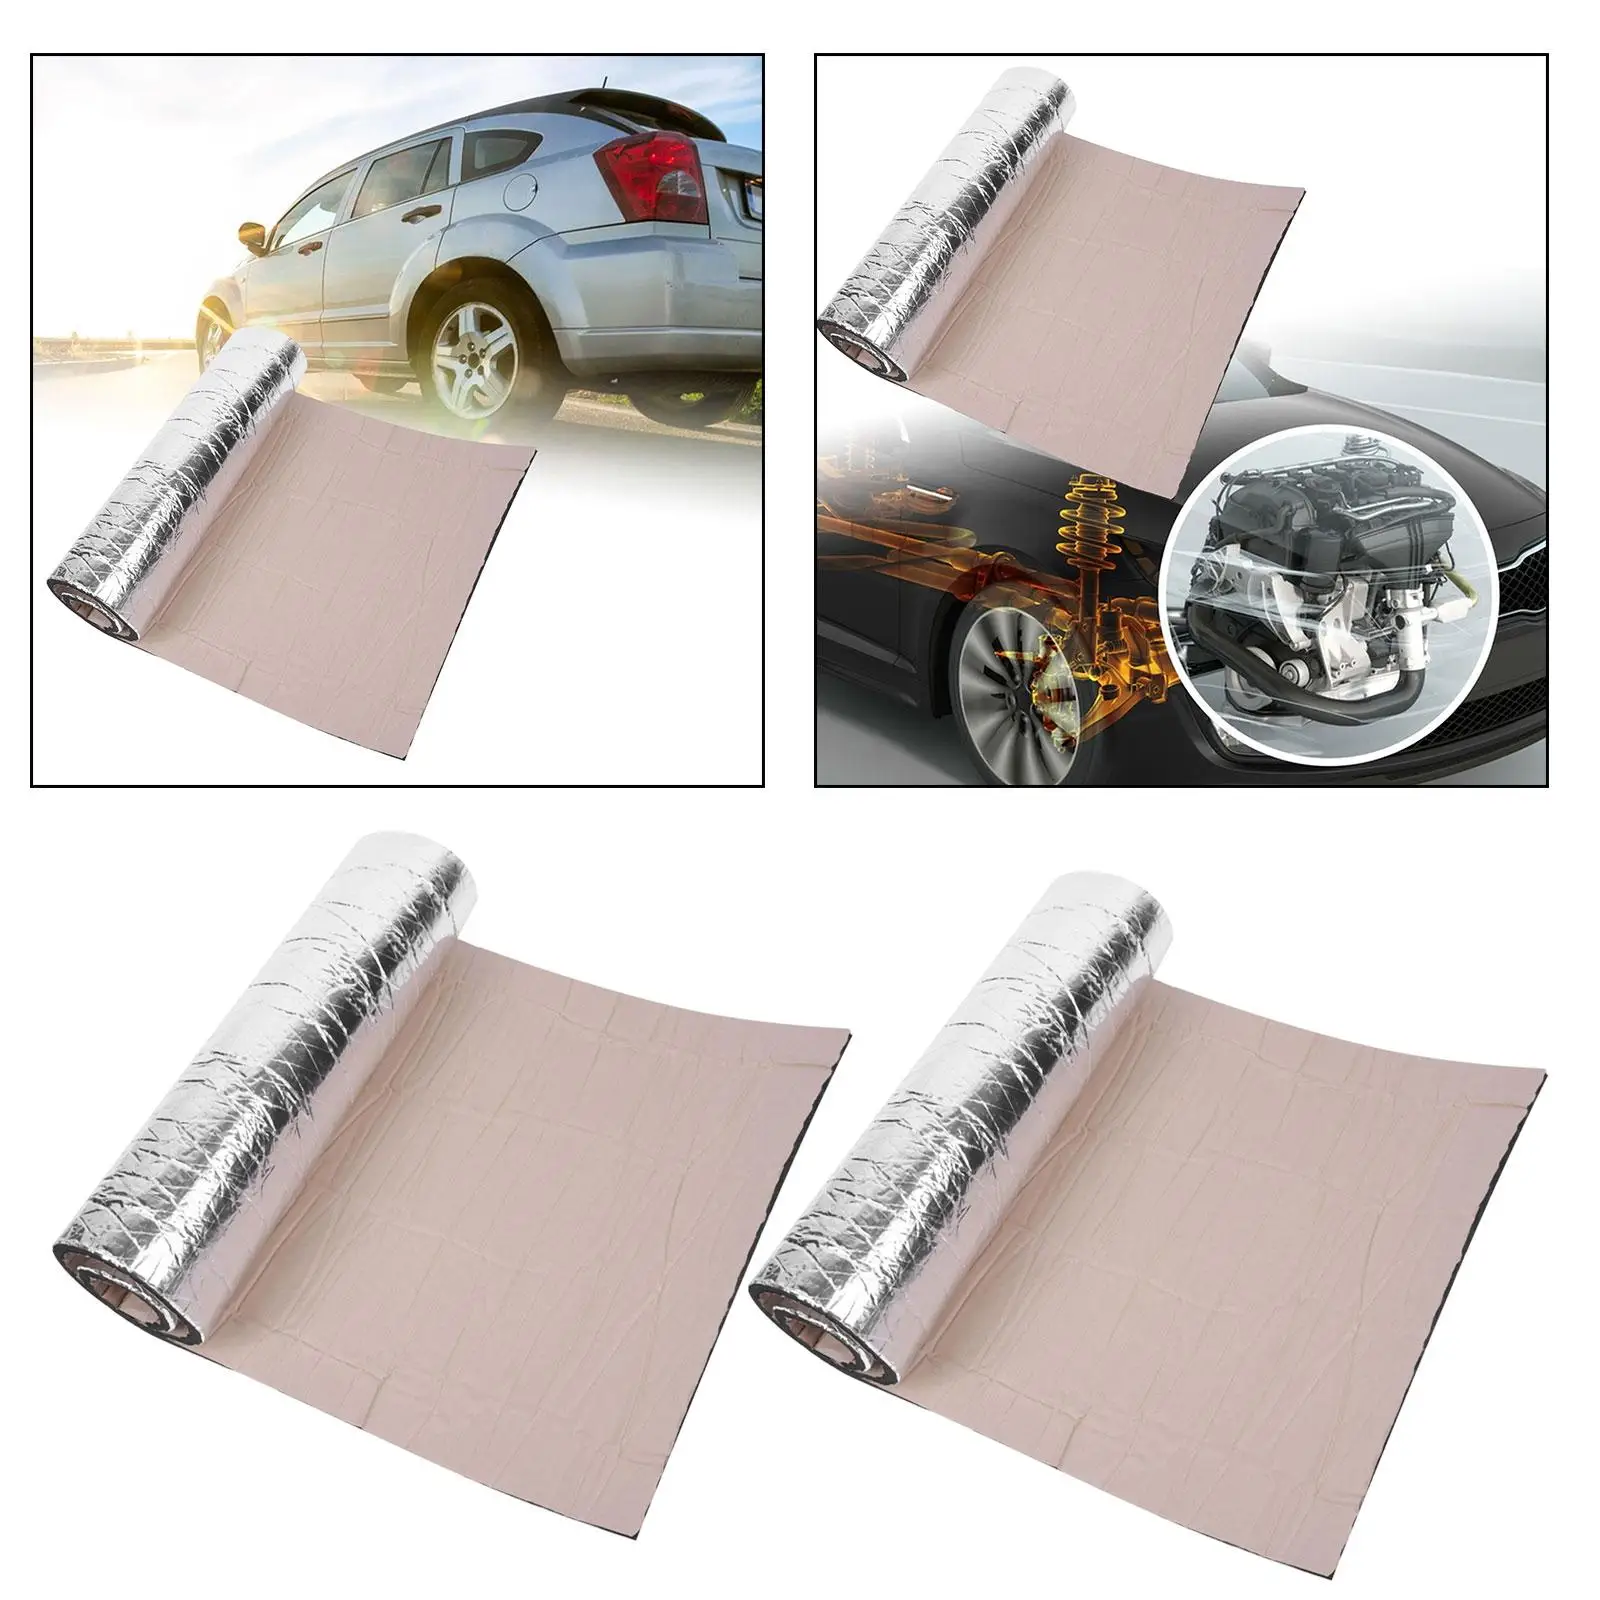 Sound Deadener Mat for Cars 100cmx40cm Self Adhesive Audio Noise Insulation for Chassis Engine Car Hood Roof Easy to Cut